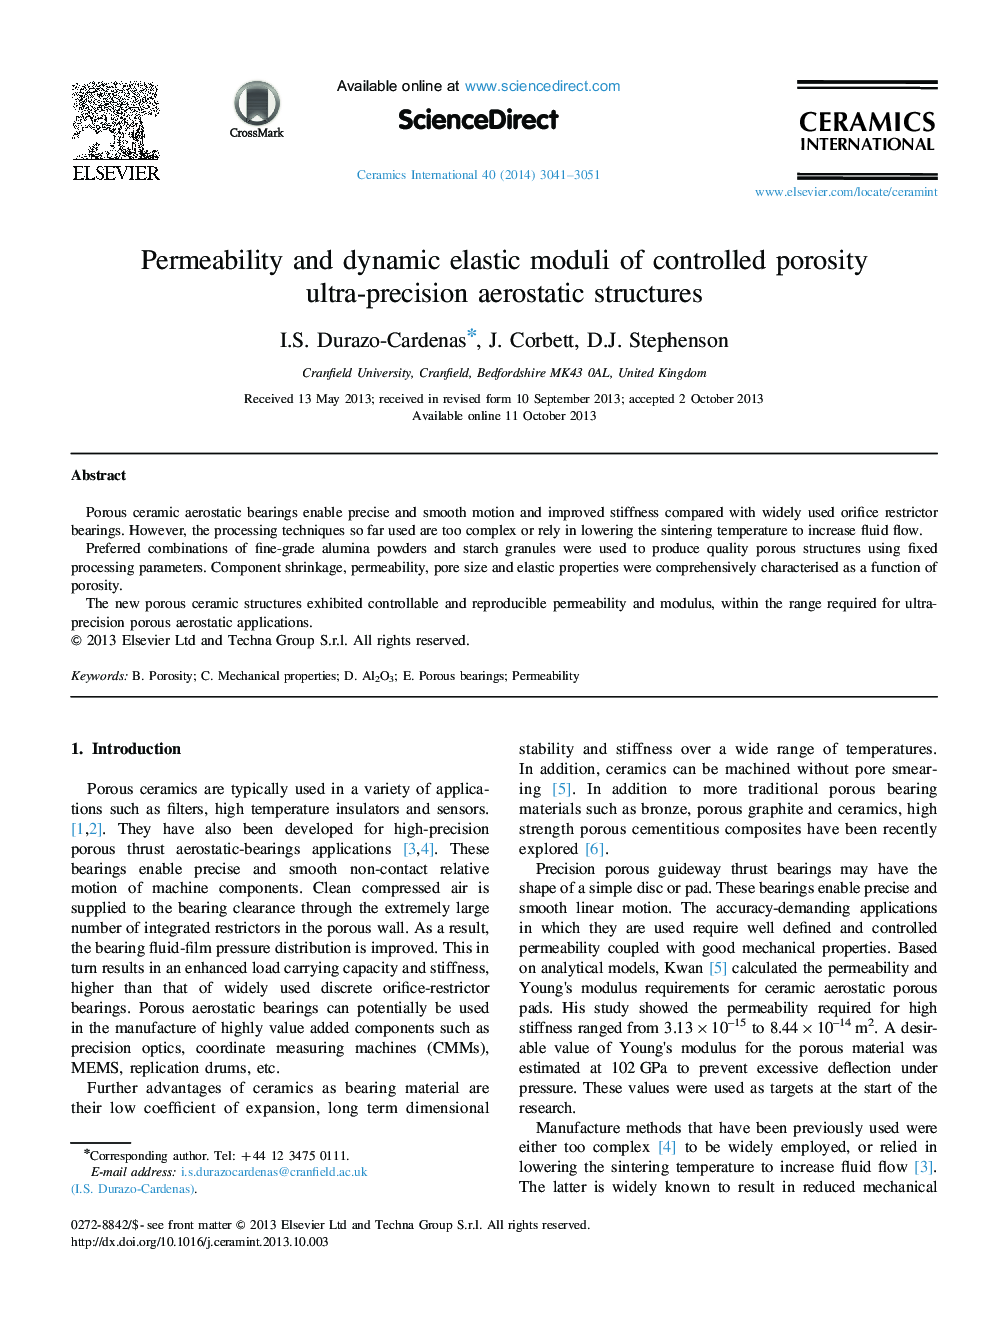 Permeability and dynamic elastic moduli of controlled porosity ultra-precision aerostatic structures